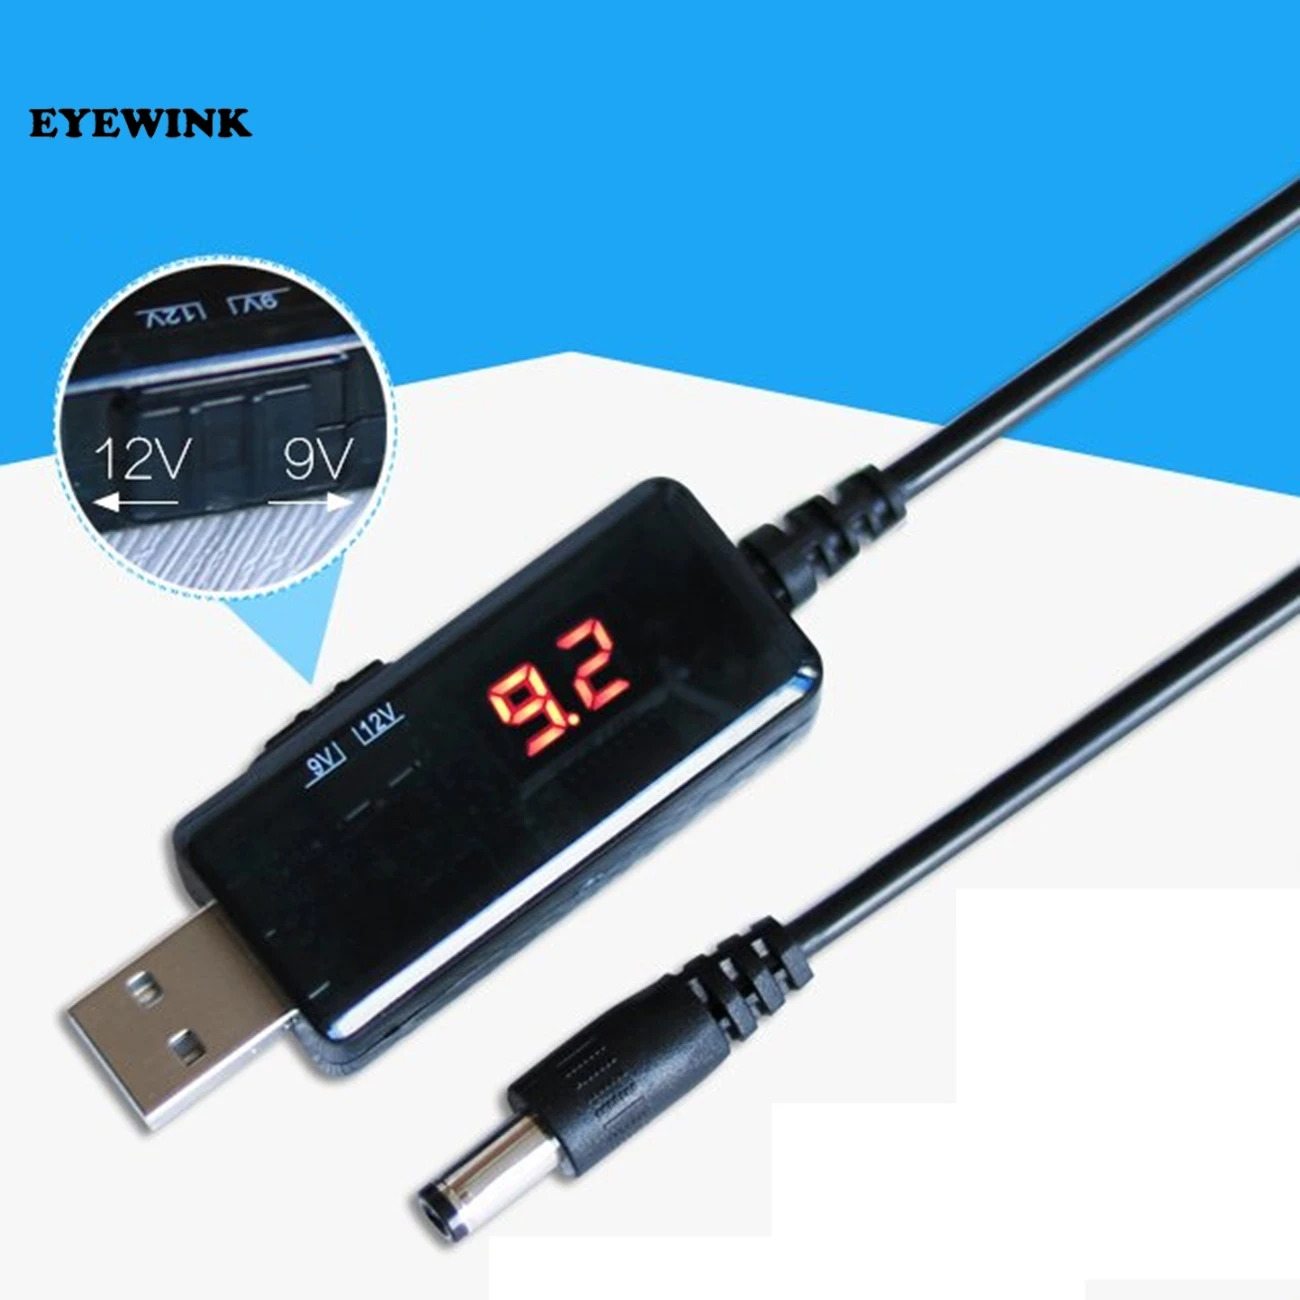 USB to DC Cable Power Bank Router Cord - StepUp Digital Display Adjustable  5V to 9V 12V - Convert and Boost Voltage - Suitable for 5521m DC